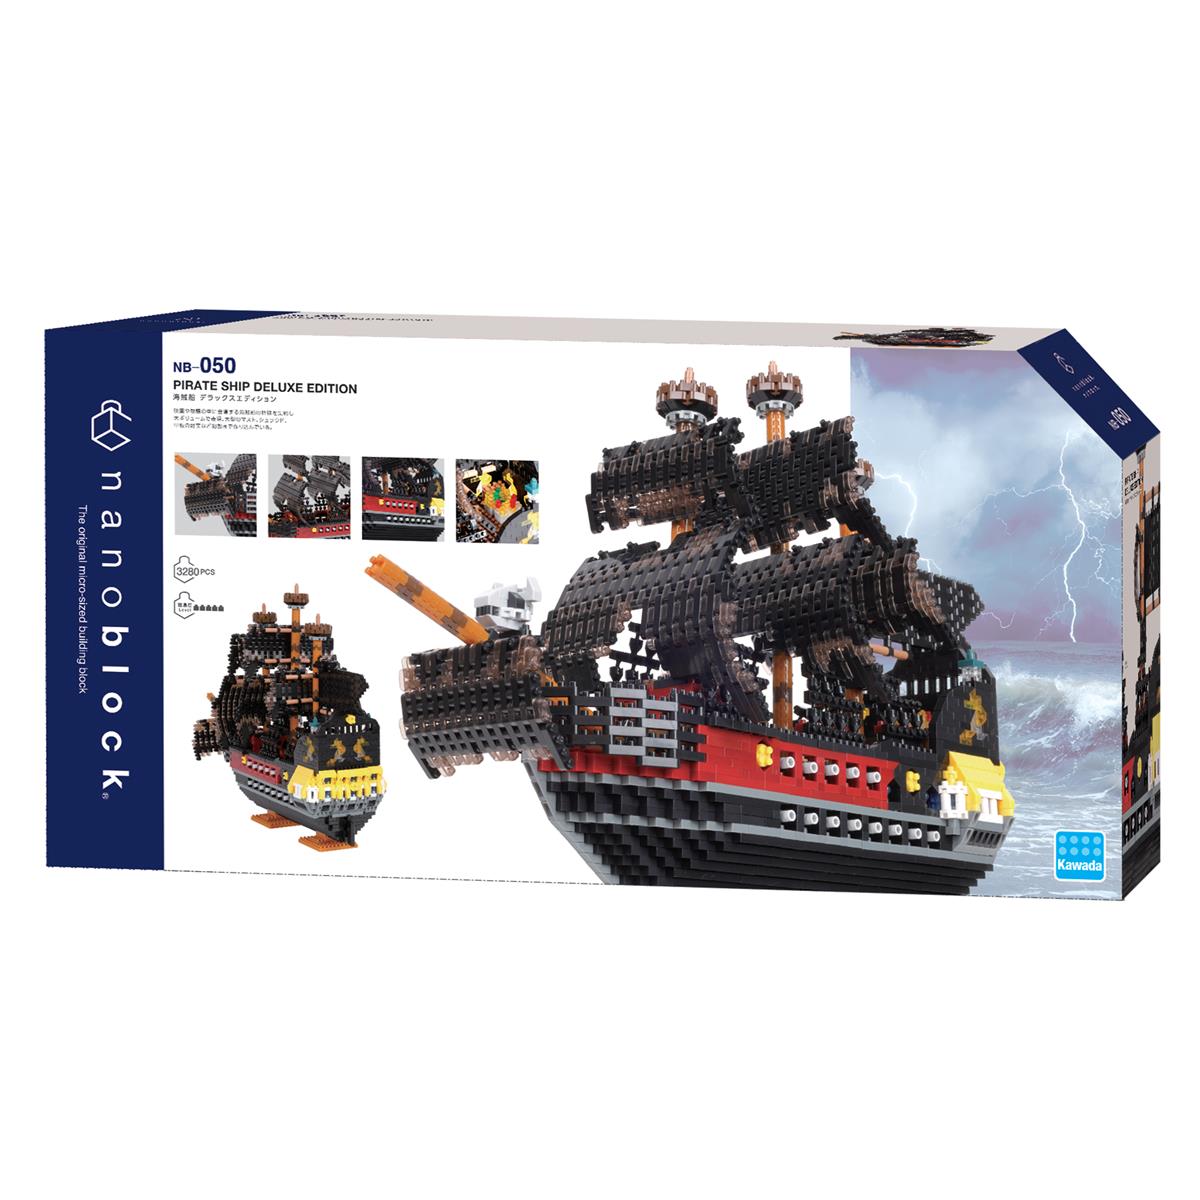 NB-050 - Pirate Ship Deluxe Edition